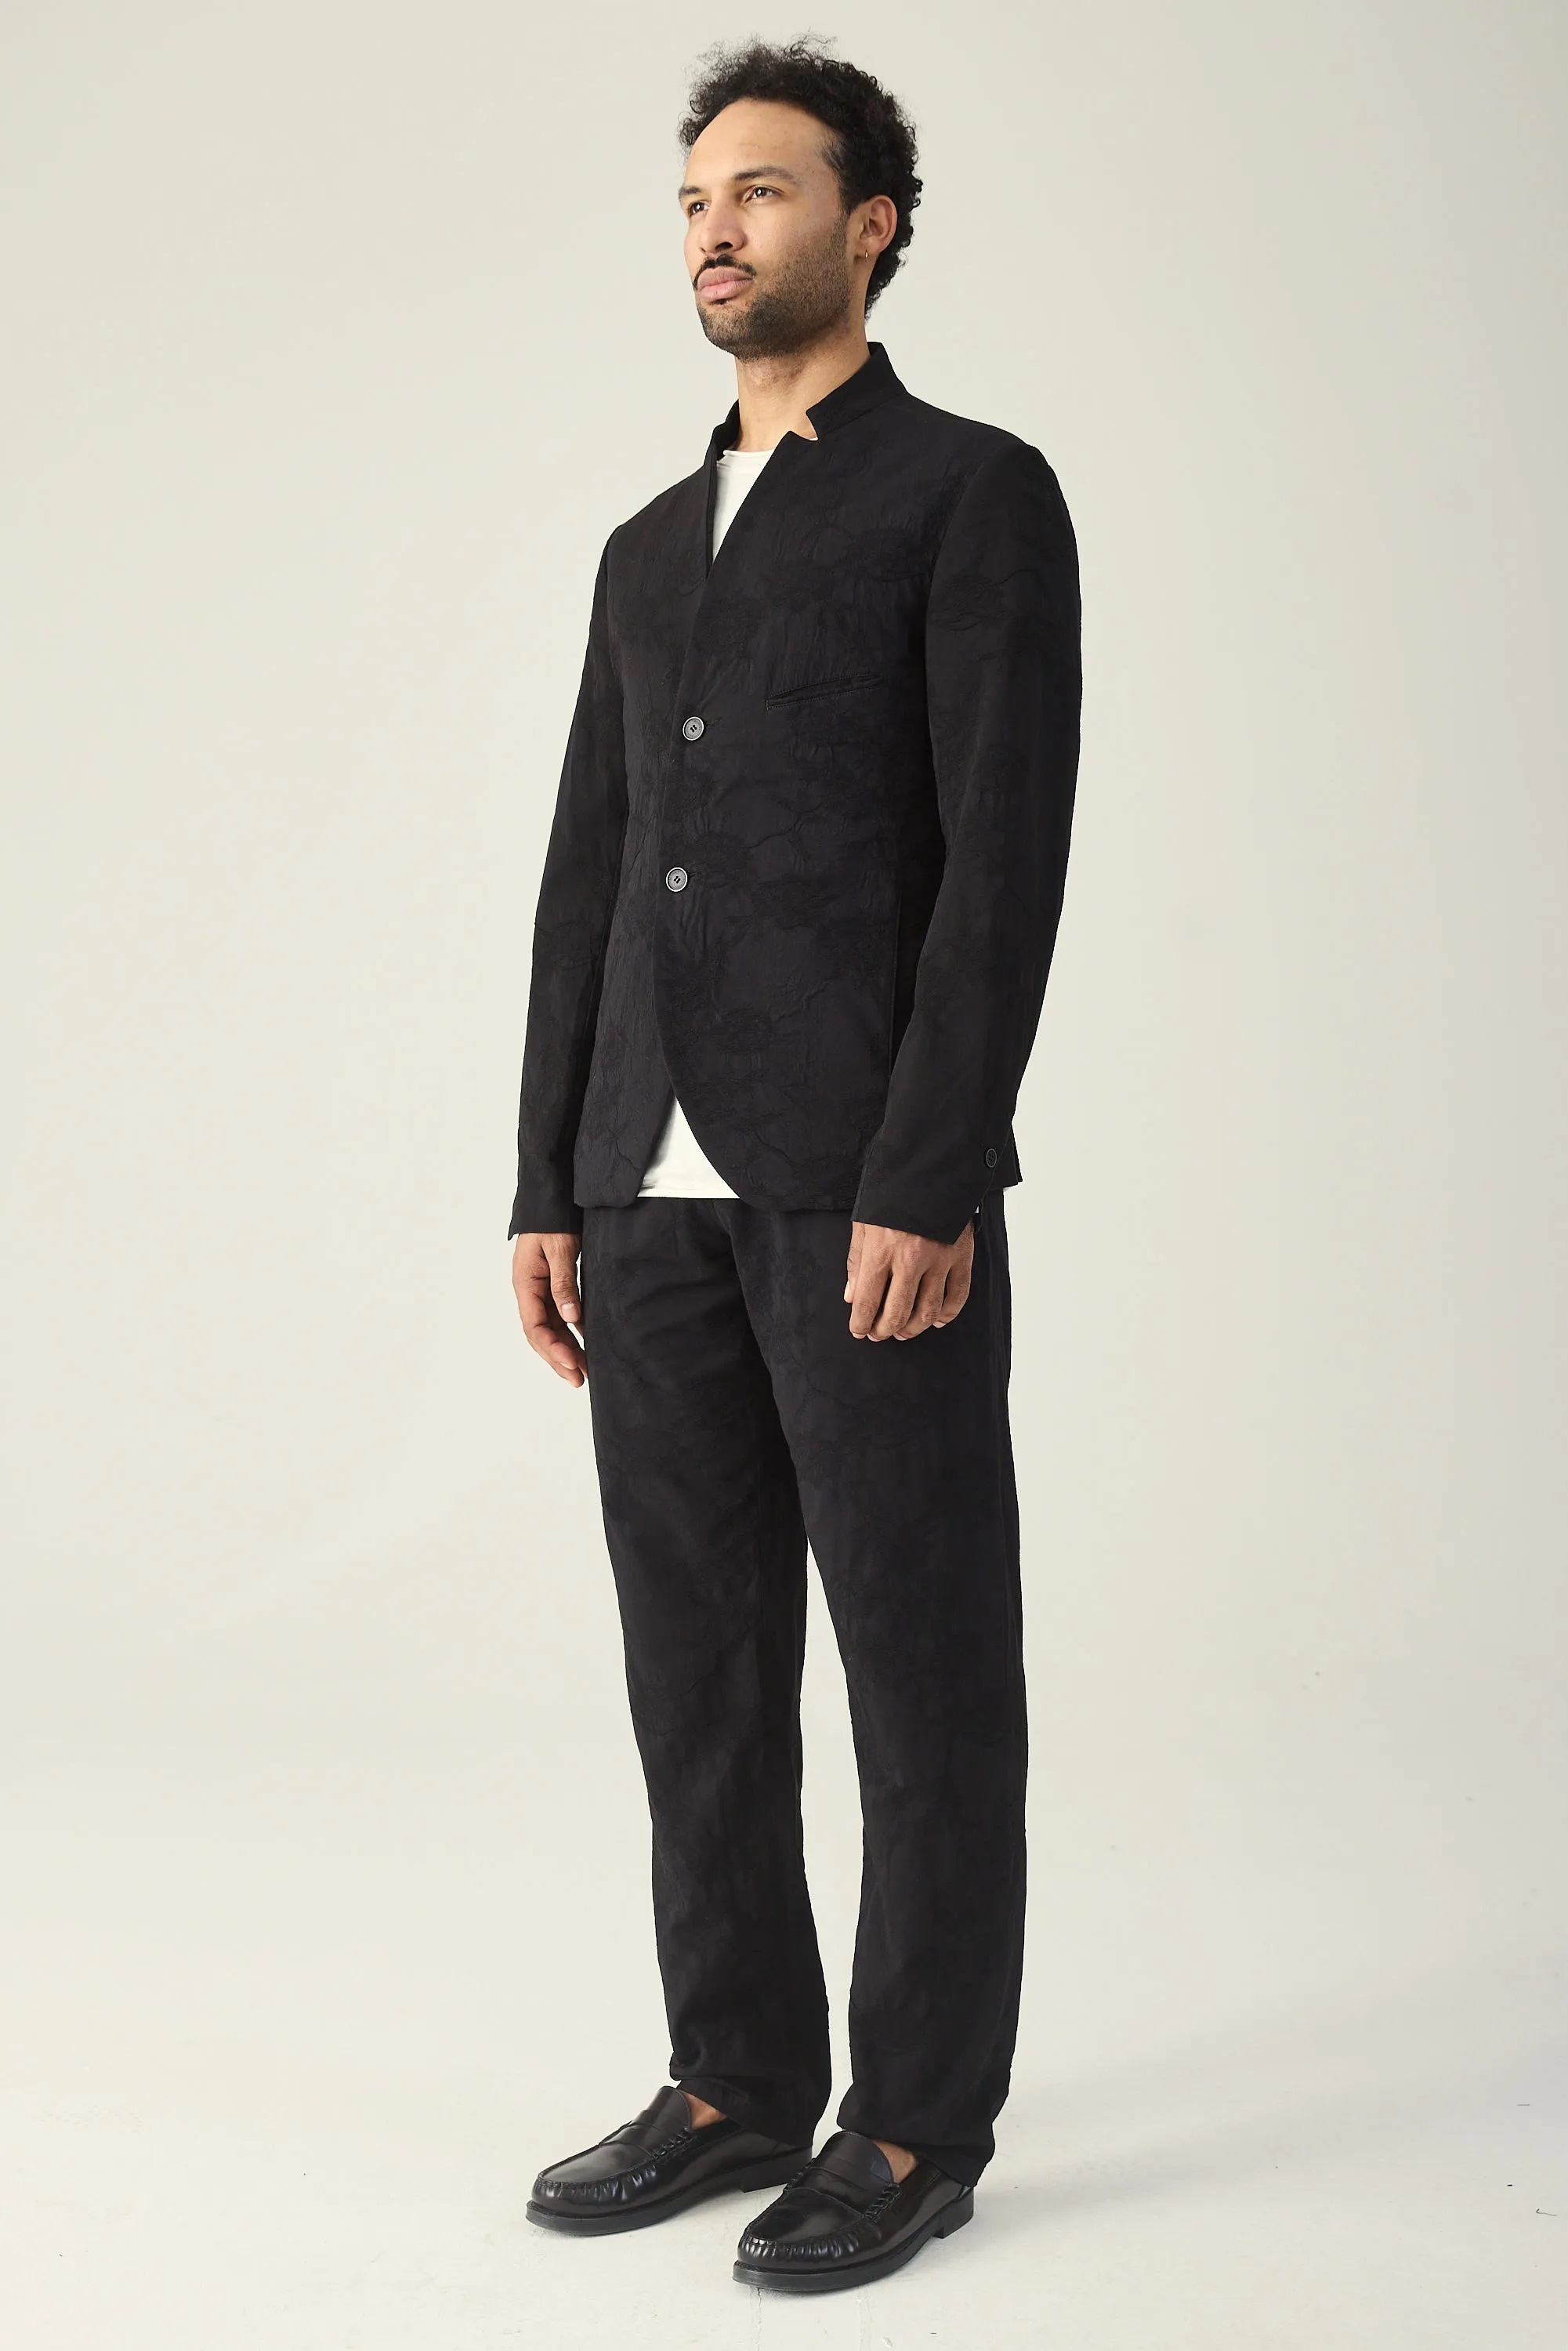 HANNIBAL. Embroidered Trouser Hannes in Black 48